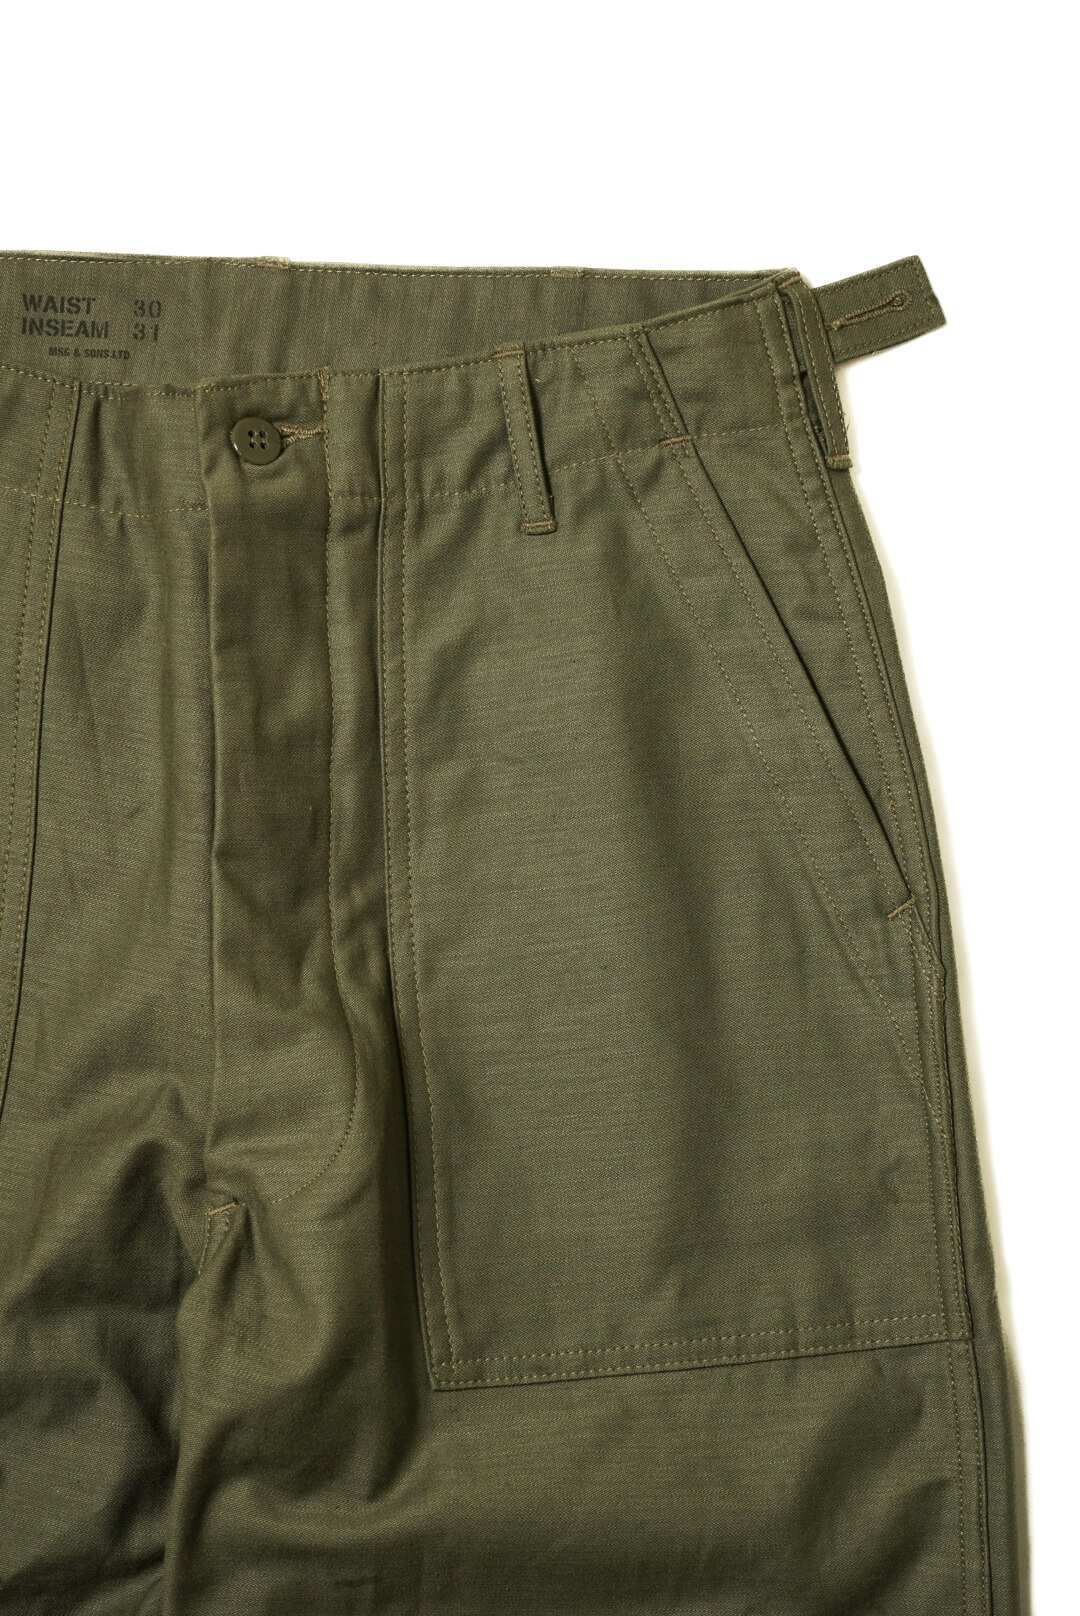 MSG & SONS BAKER PANTS – MADE IN USA | ARCH アーチ - Sapporo / Tokyo